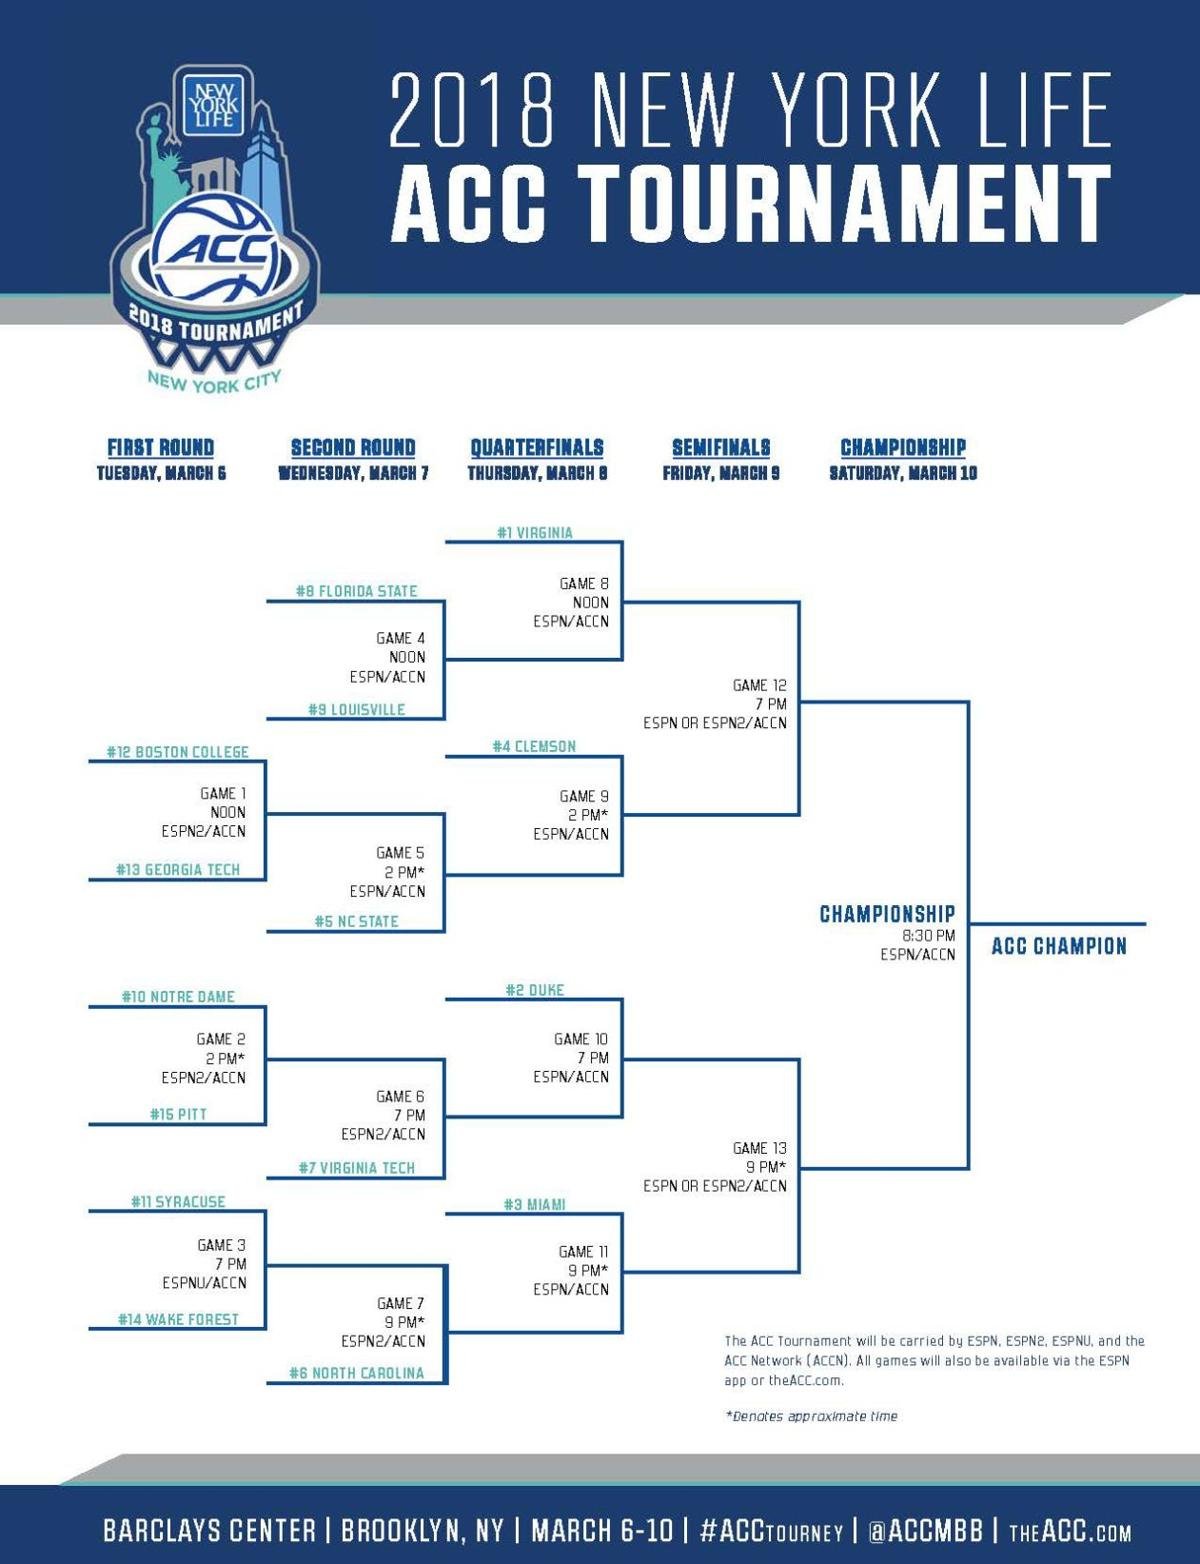 ACC Championship bracket unveiled, Hokies seeded seventh Sports